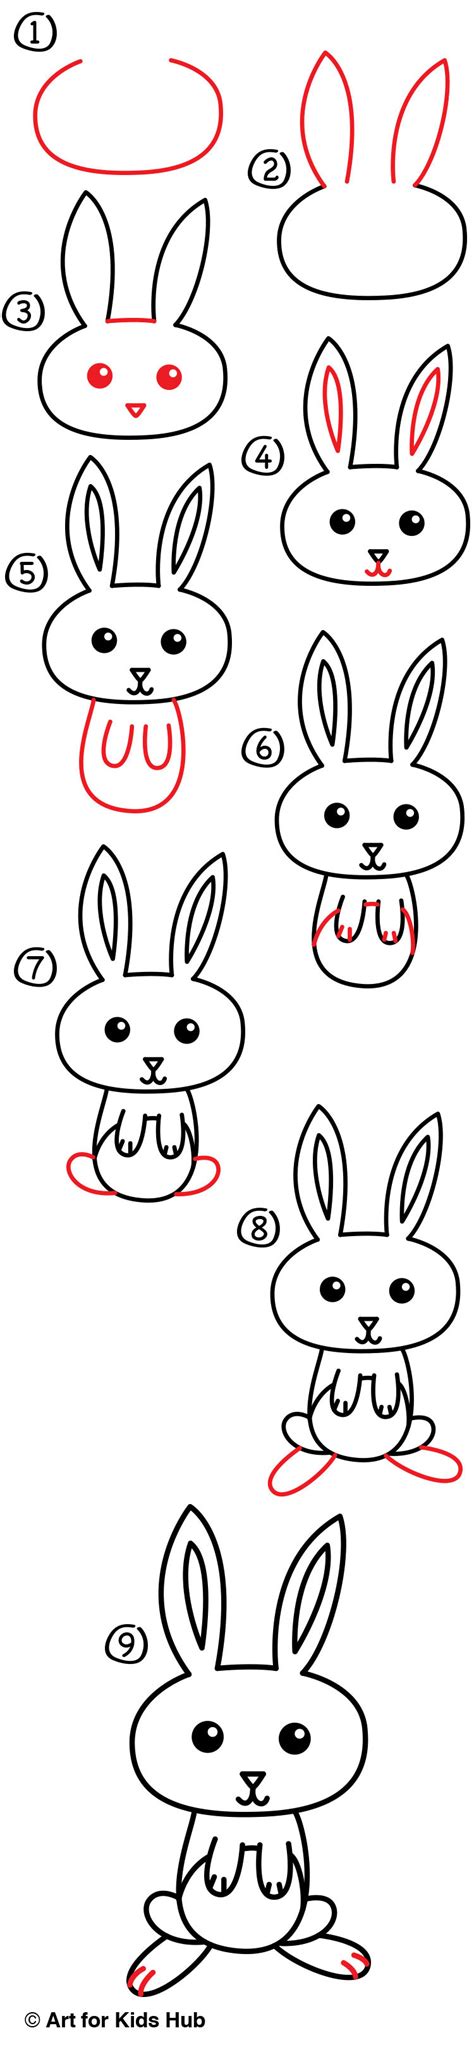 How To Draw A Cartoon Easter Bunny Art For Kids Hub